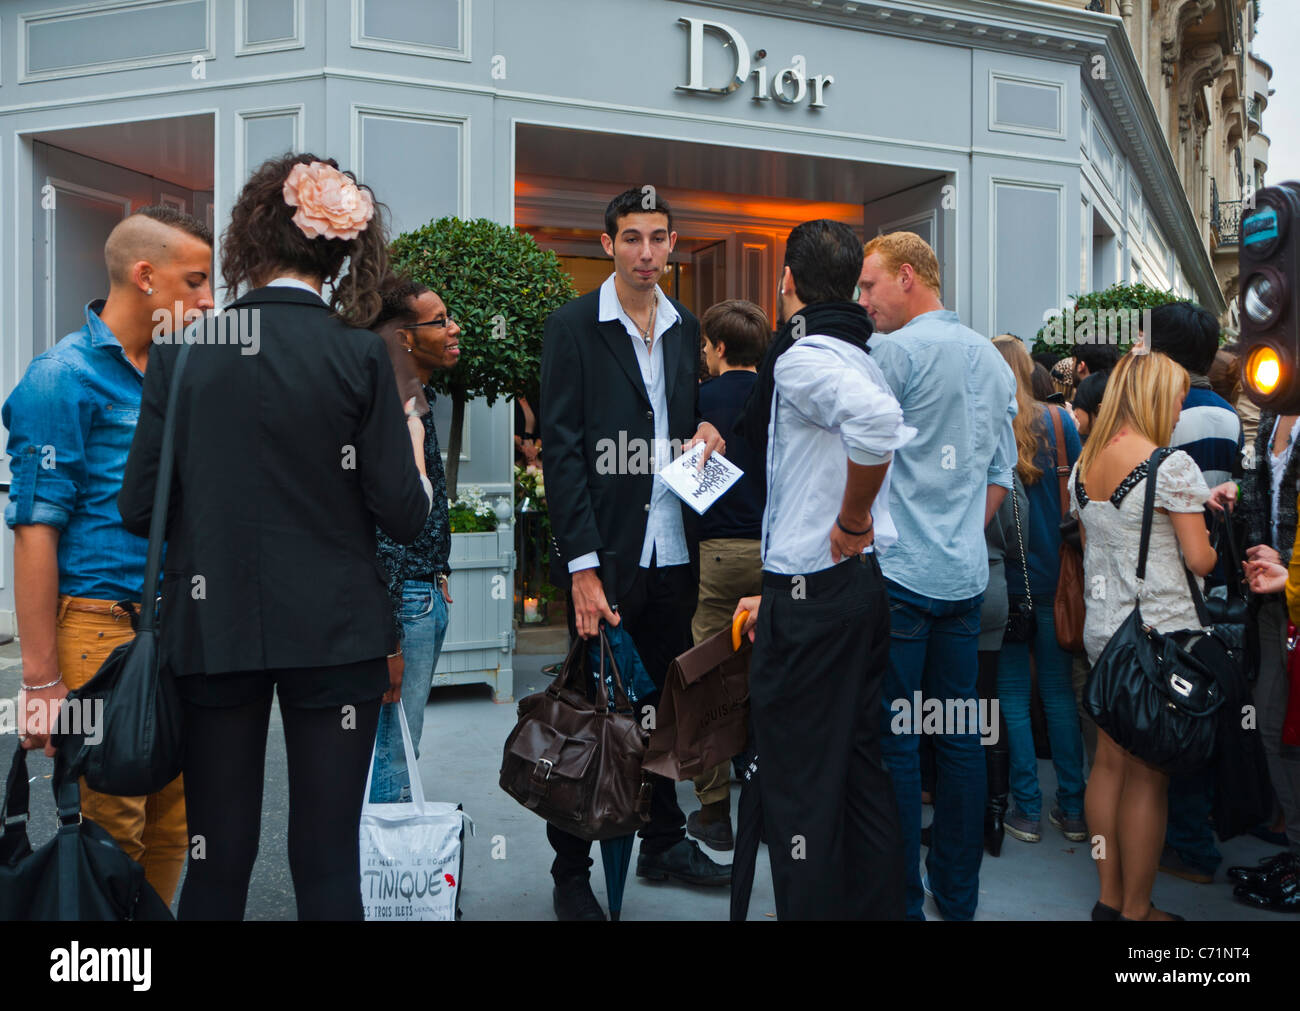 Paris, France, Large Crowd People, Men Shopping on Street, at dior 30 avenue montaigne, Front of Christian Dior Store Front, mode labels, Sale Stock Photo